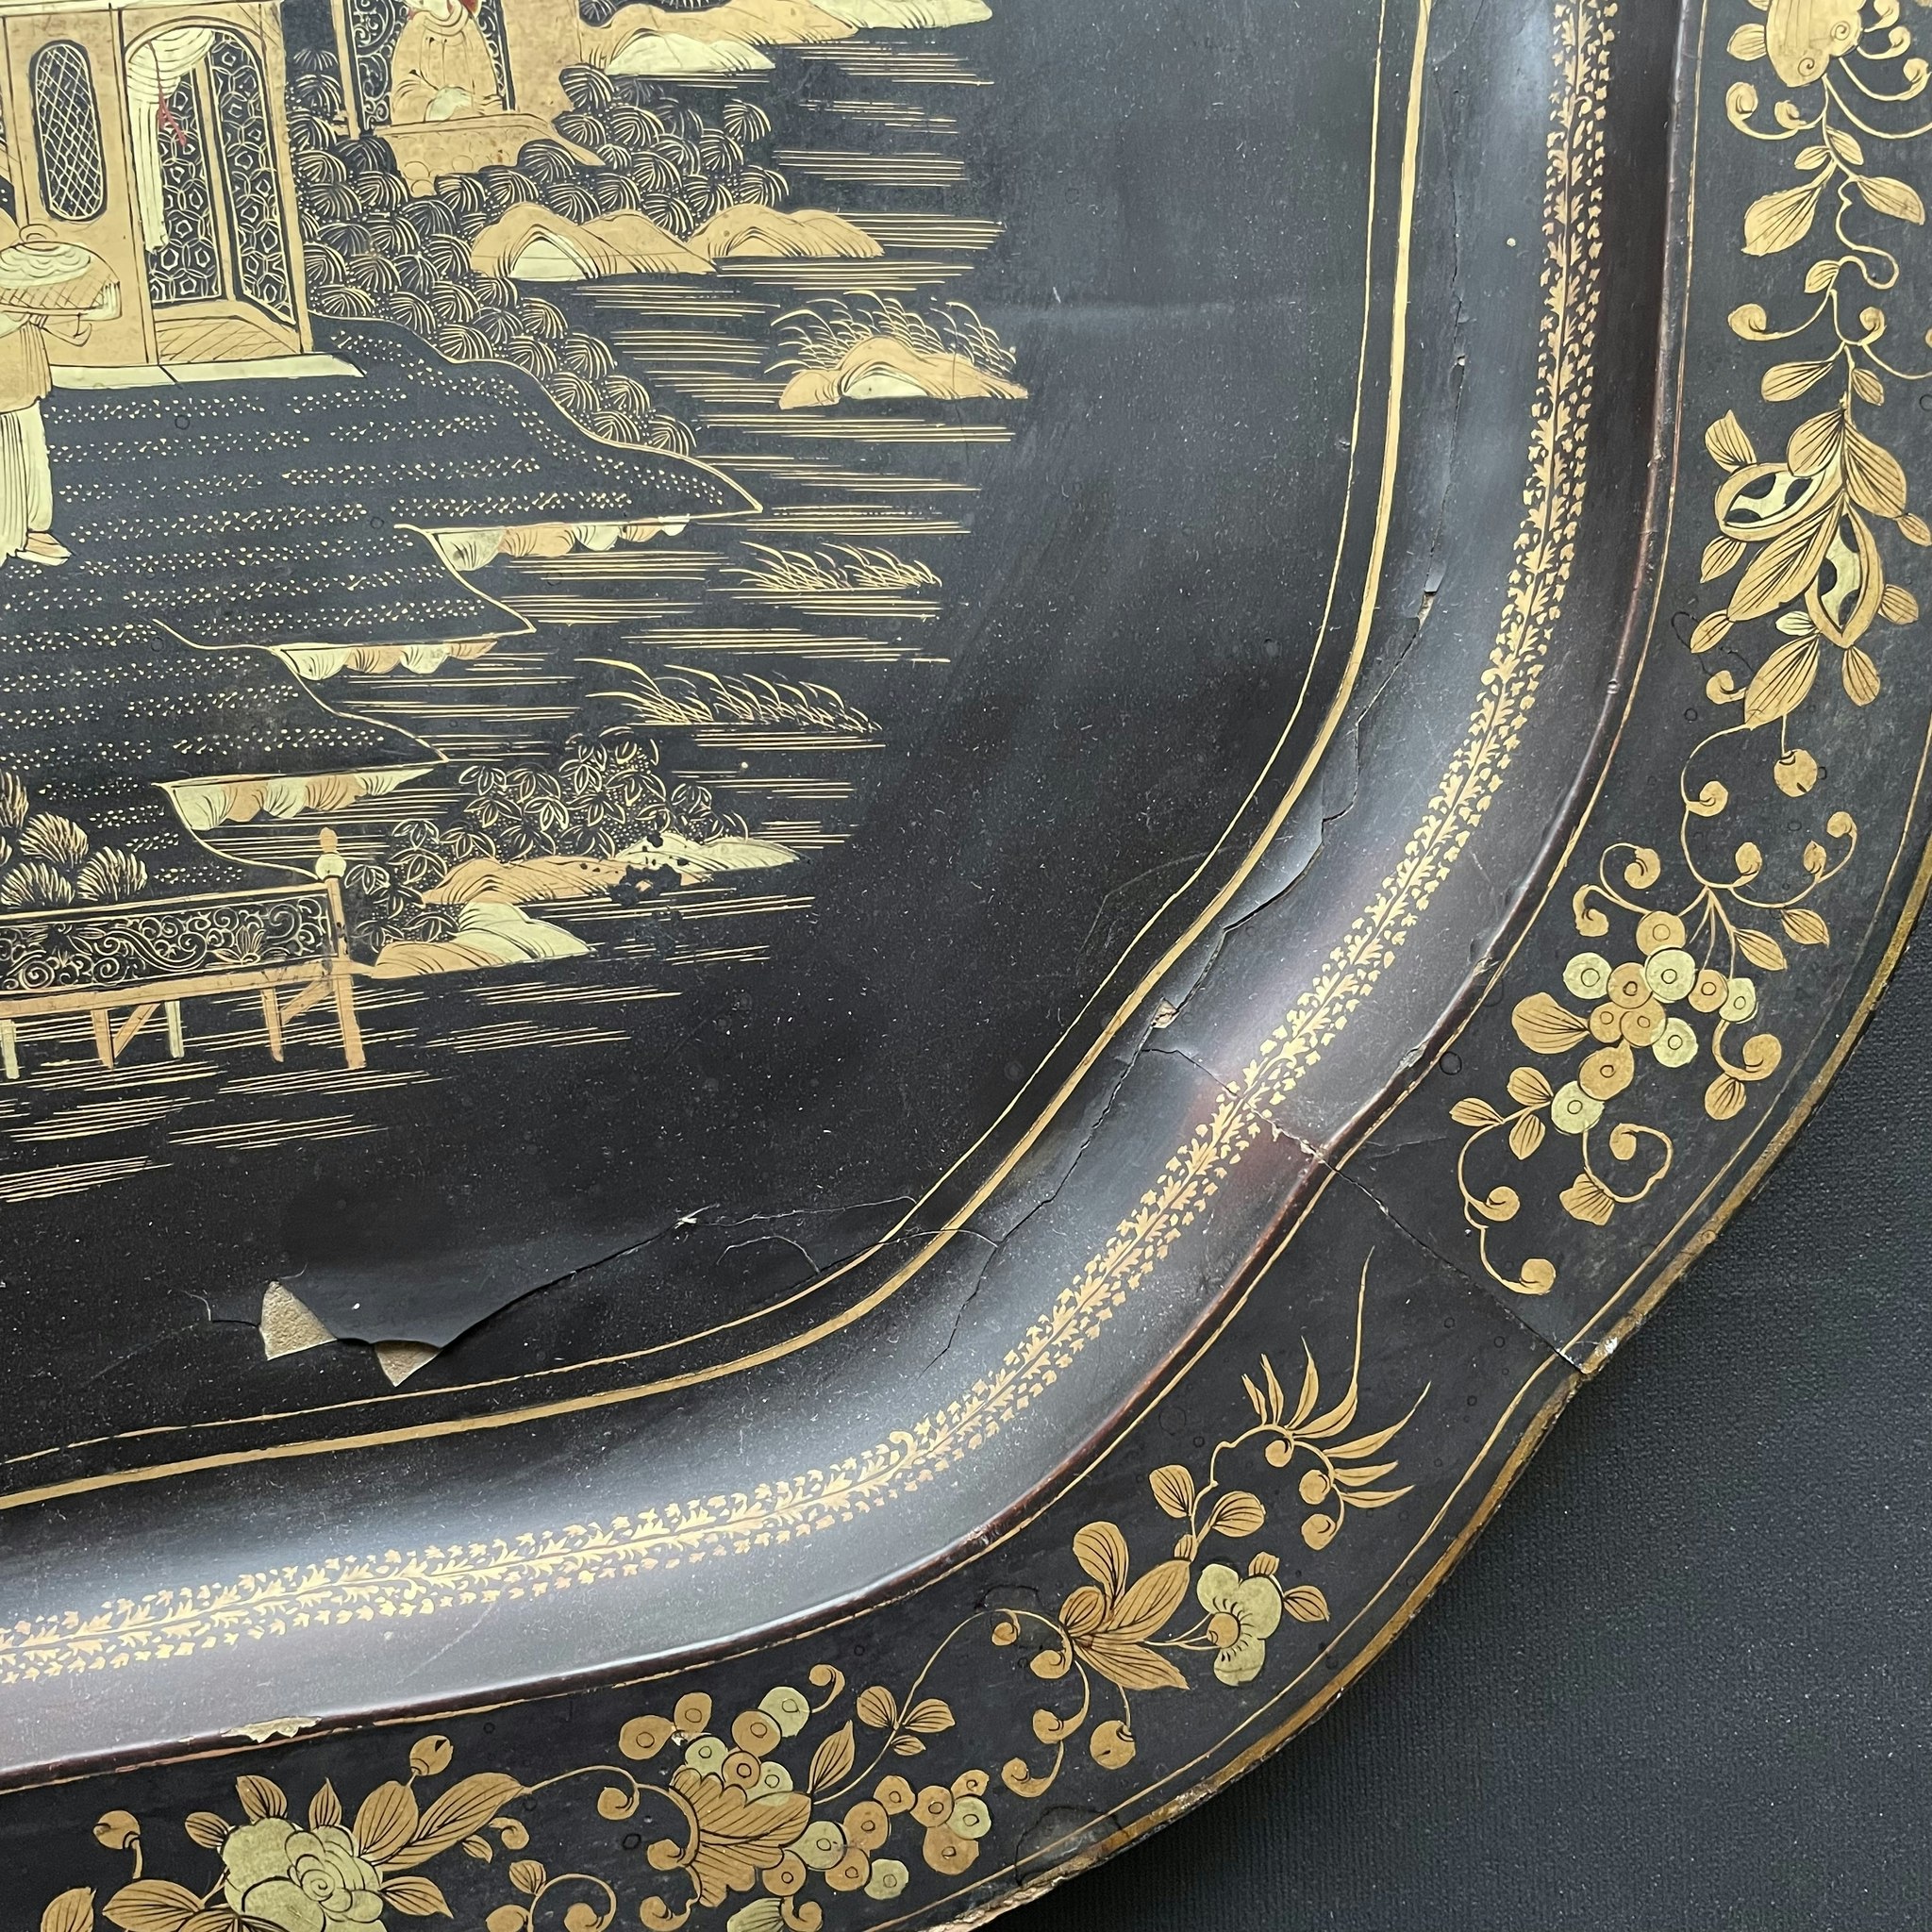 Antique Chinese Large Black Lacquered export Tray Hand Painted 19th c #1309